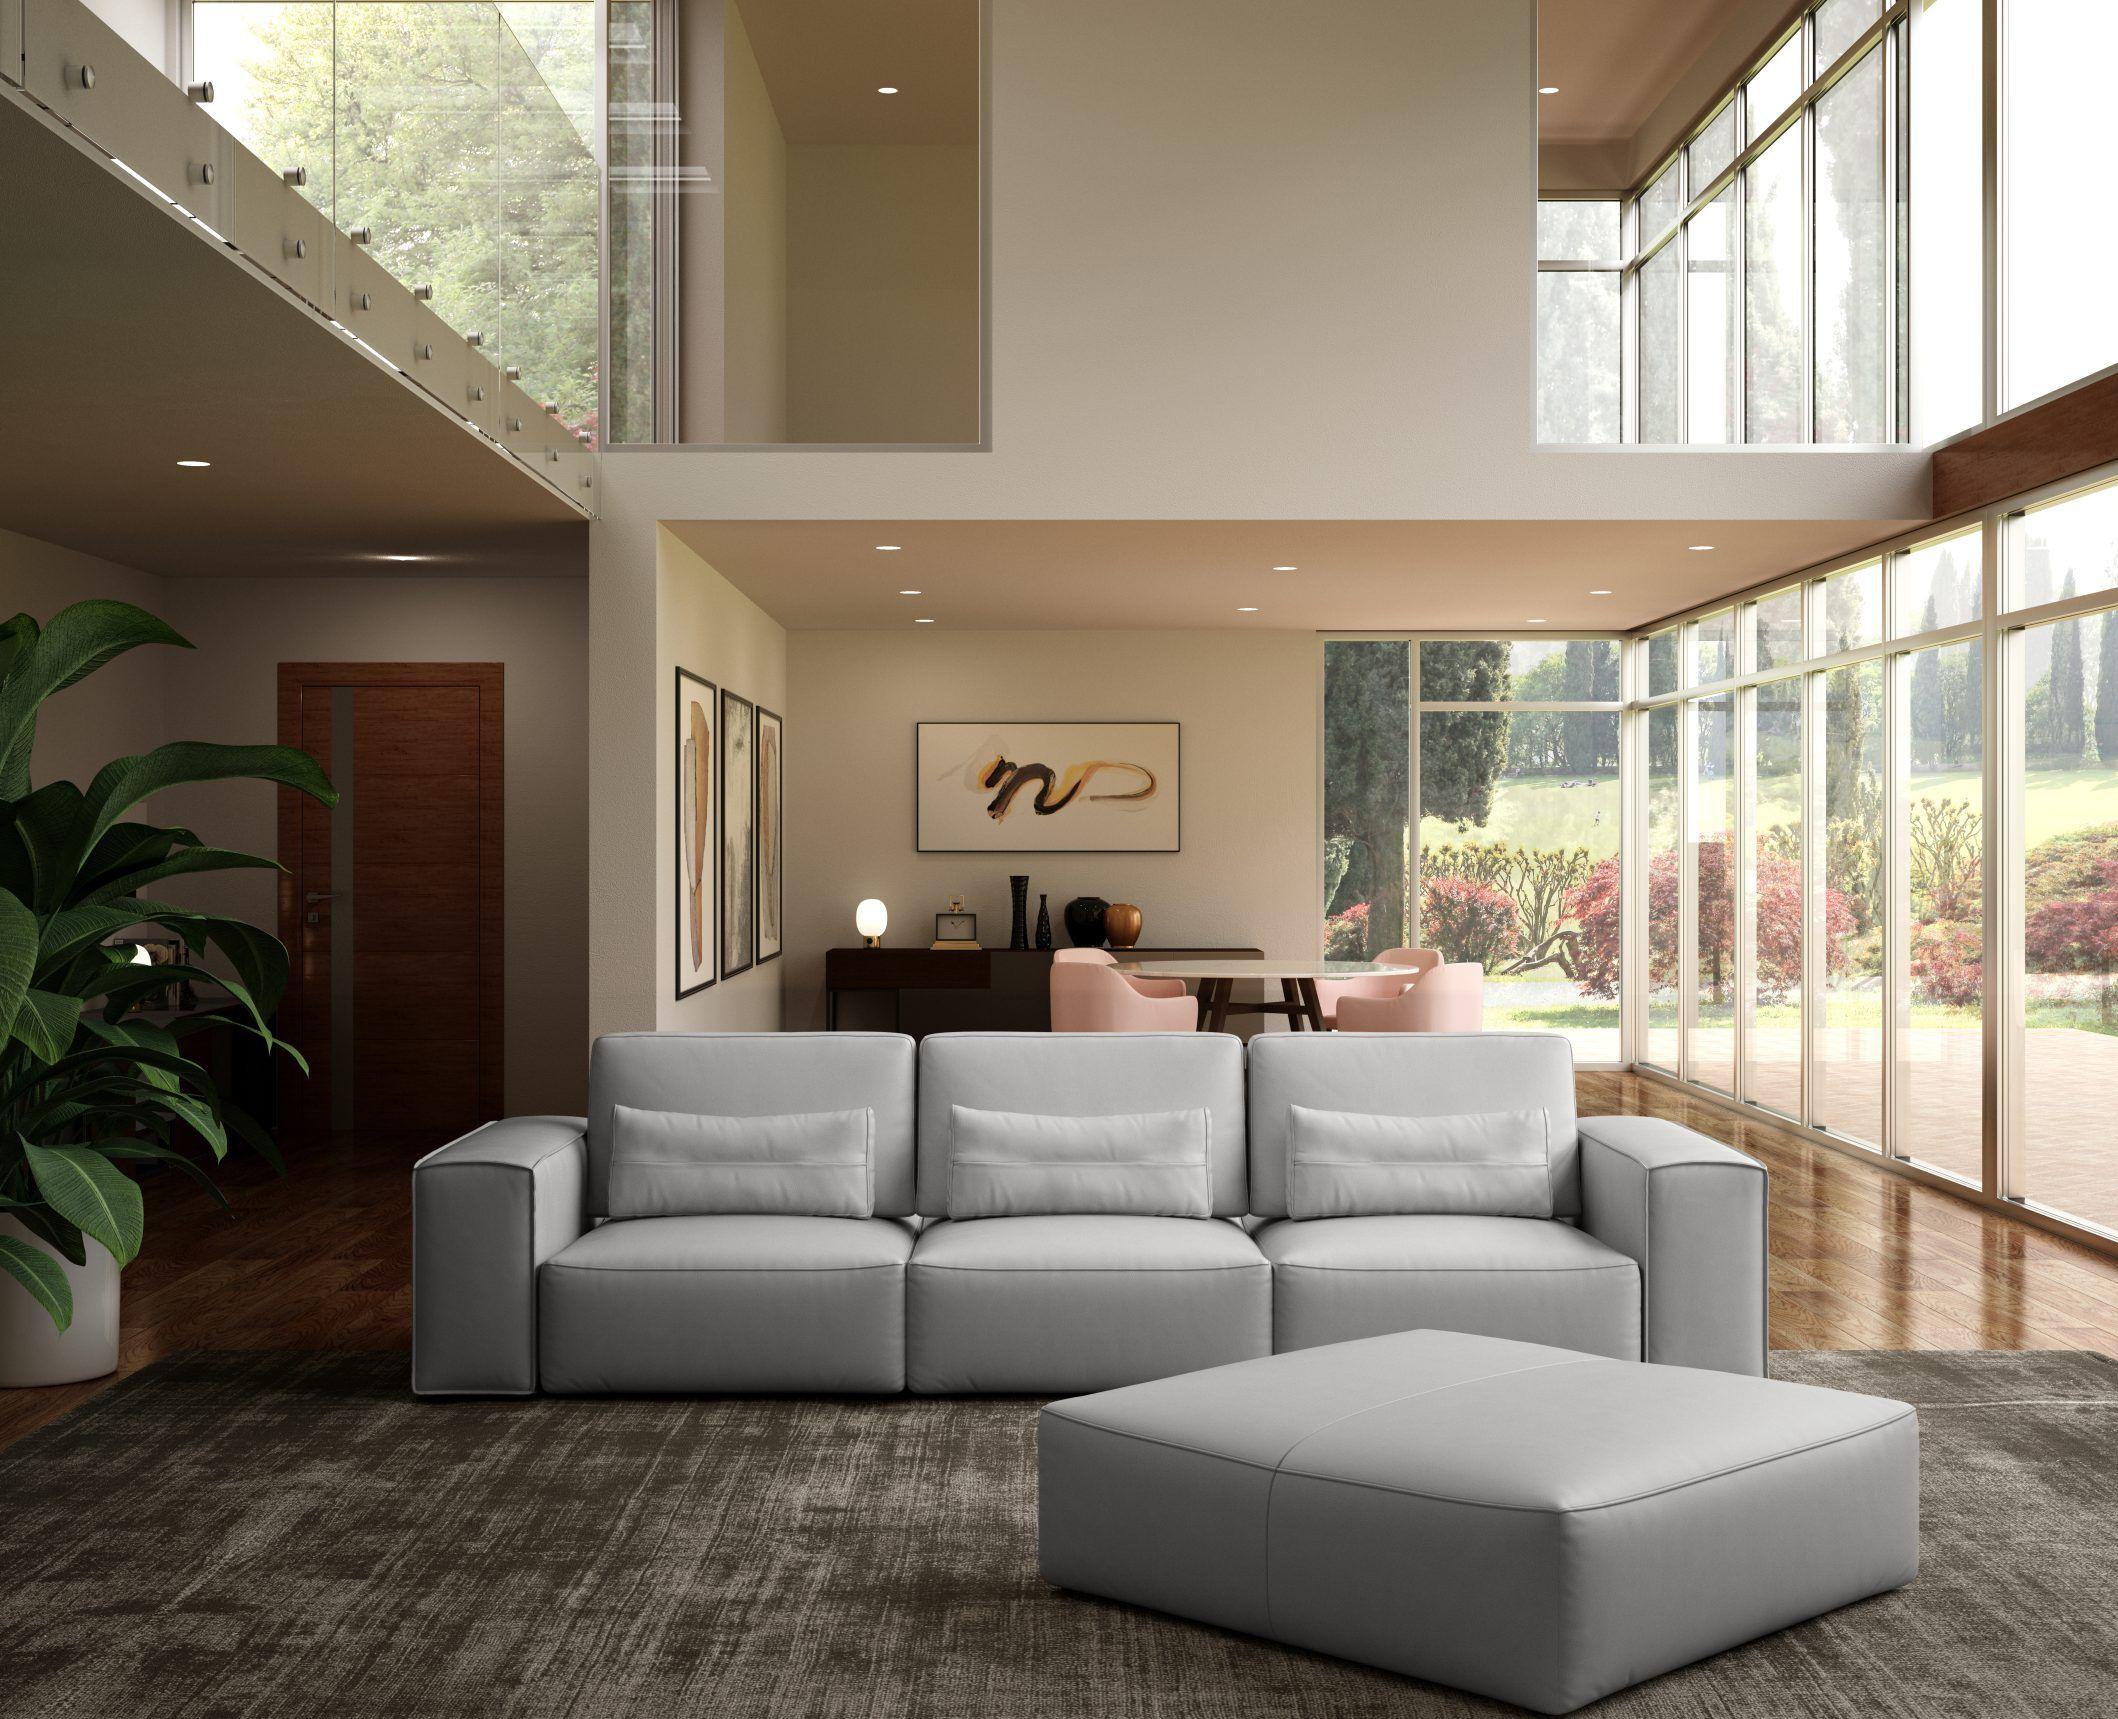 Contemporary, Modern Sofa Set VGCCHOLLYWOOOD-4STR-OTT-WHT-SECT VGCCHOLLYWOOOD-4STR-OTT-WHT-SECT in White Genuine Leather